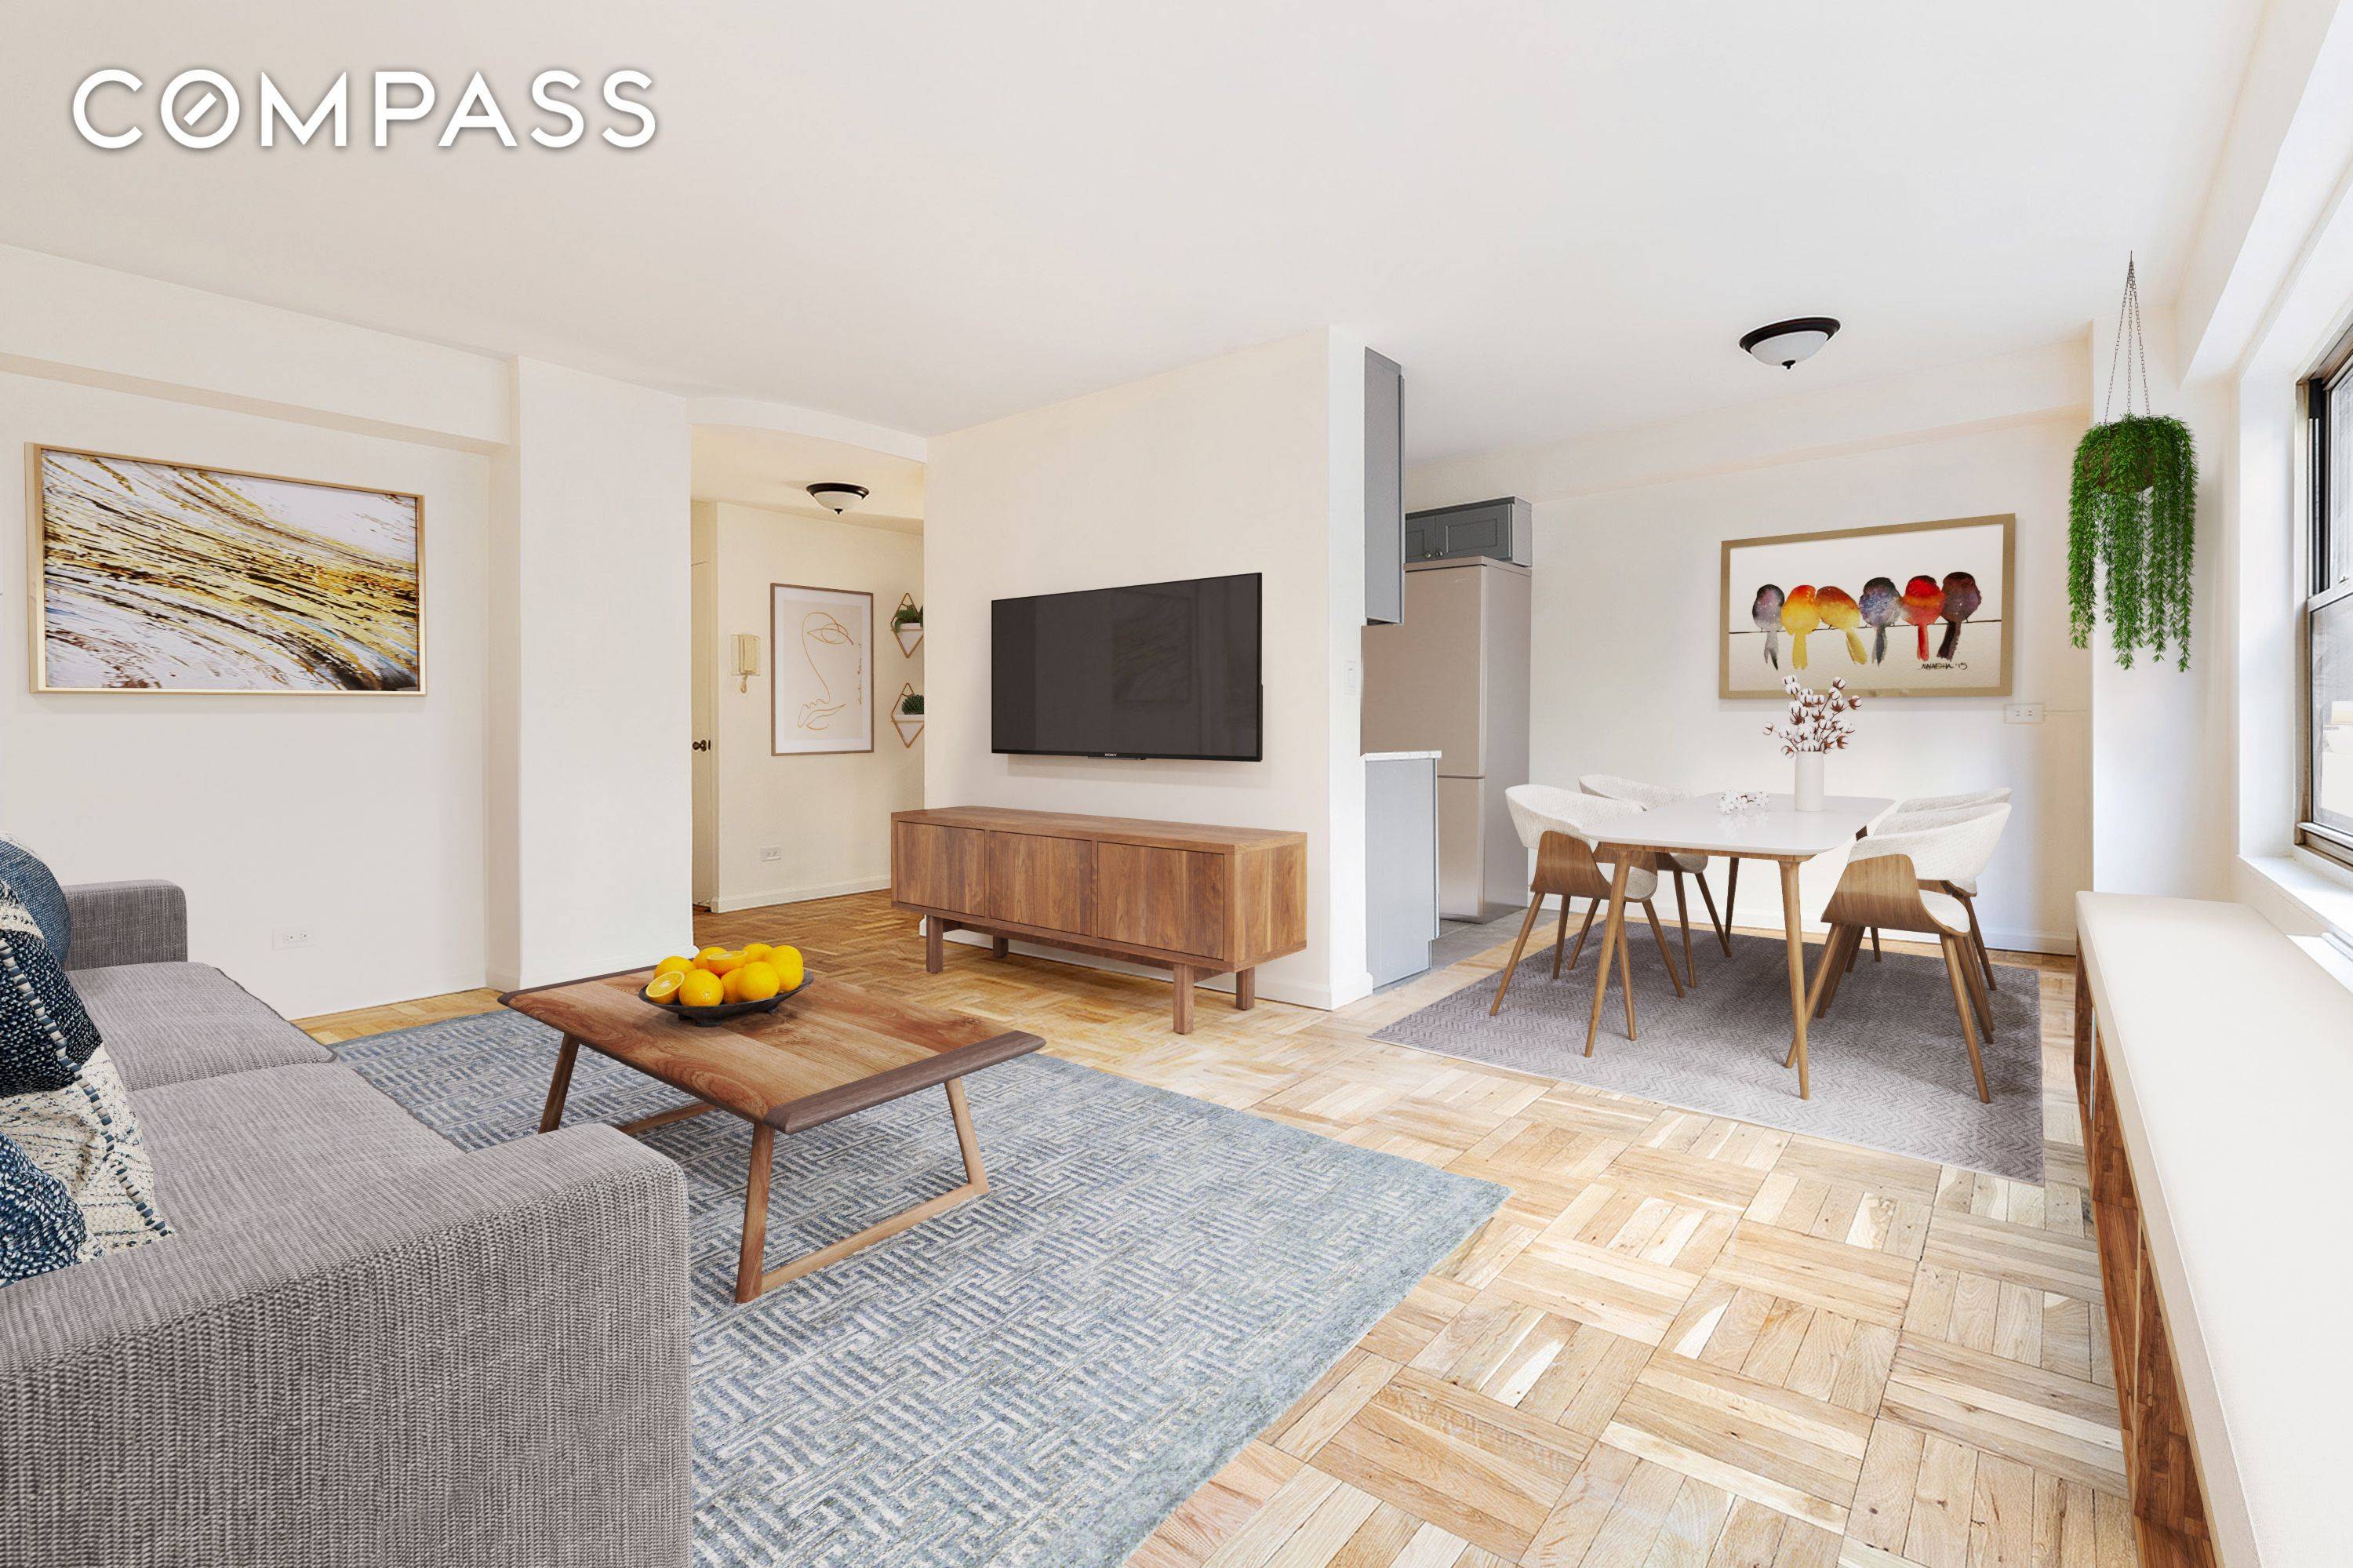 Welcome to this sunny two bedroom home just across the street from the lush Fort Greene park.